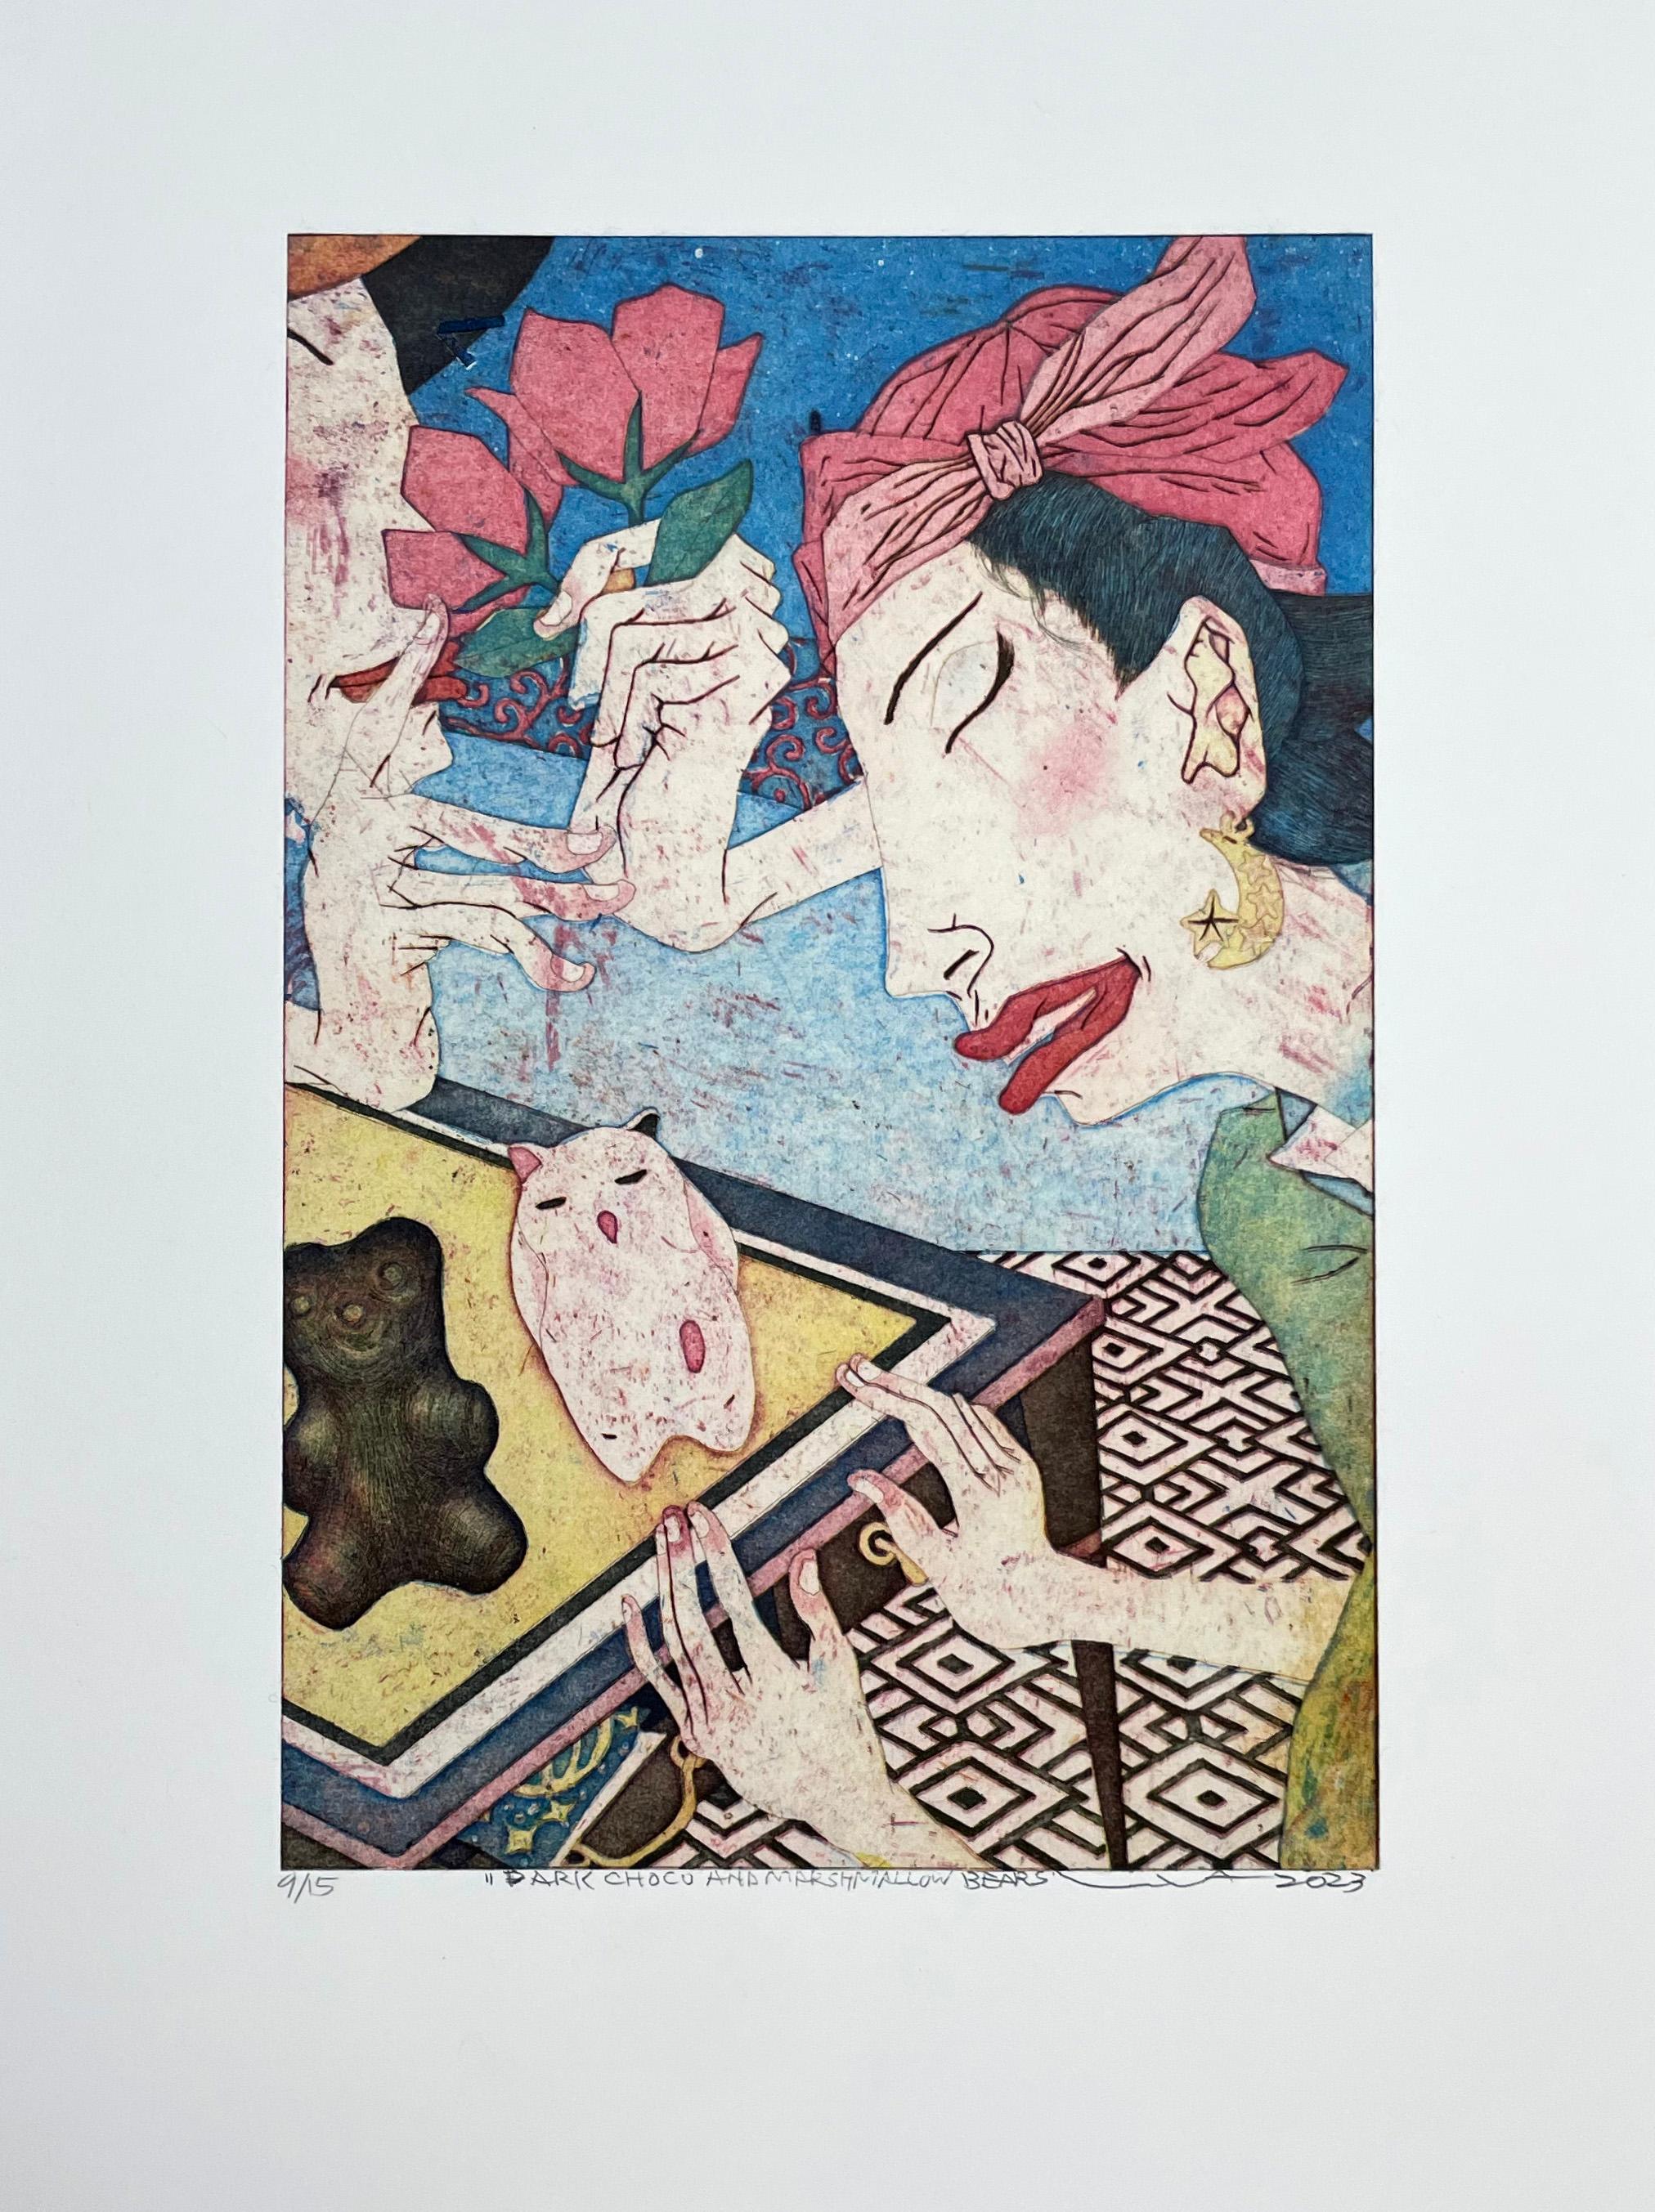 Medium: Intaglio and Chine Colle
Year: 2023
Image Size: 10.5 x 7 inches
Edition of 15

Signed, titled and numbered by the artist. A young woman with chocolate and marshmallow figures. While the images have some resemblance to traditional Japanese